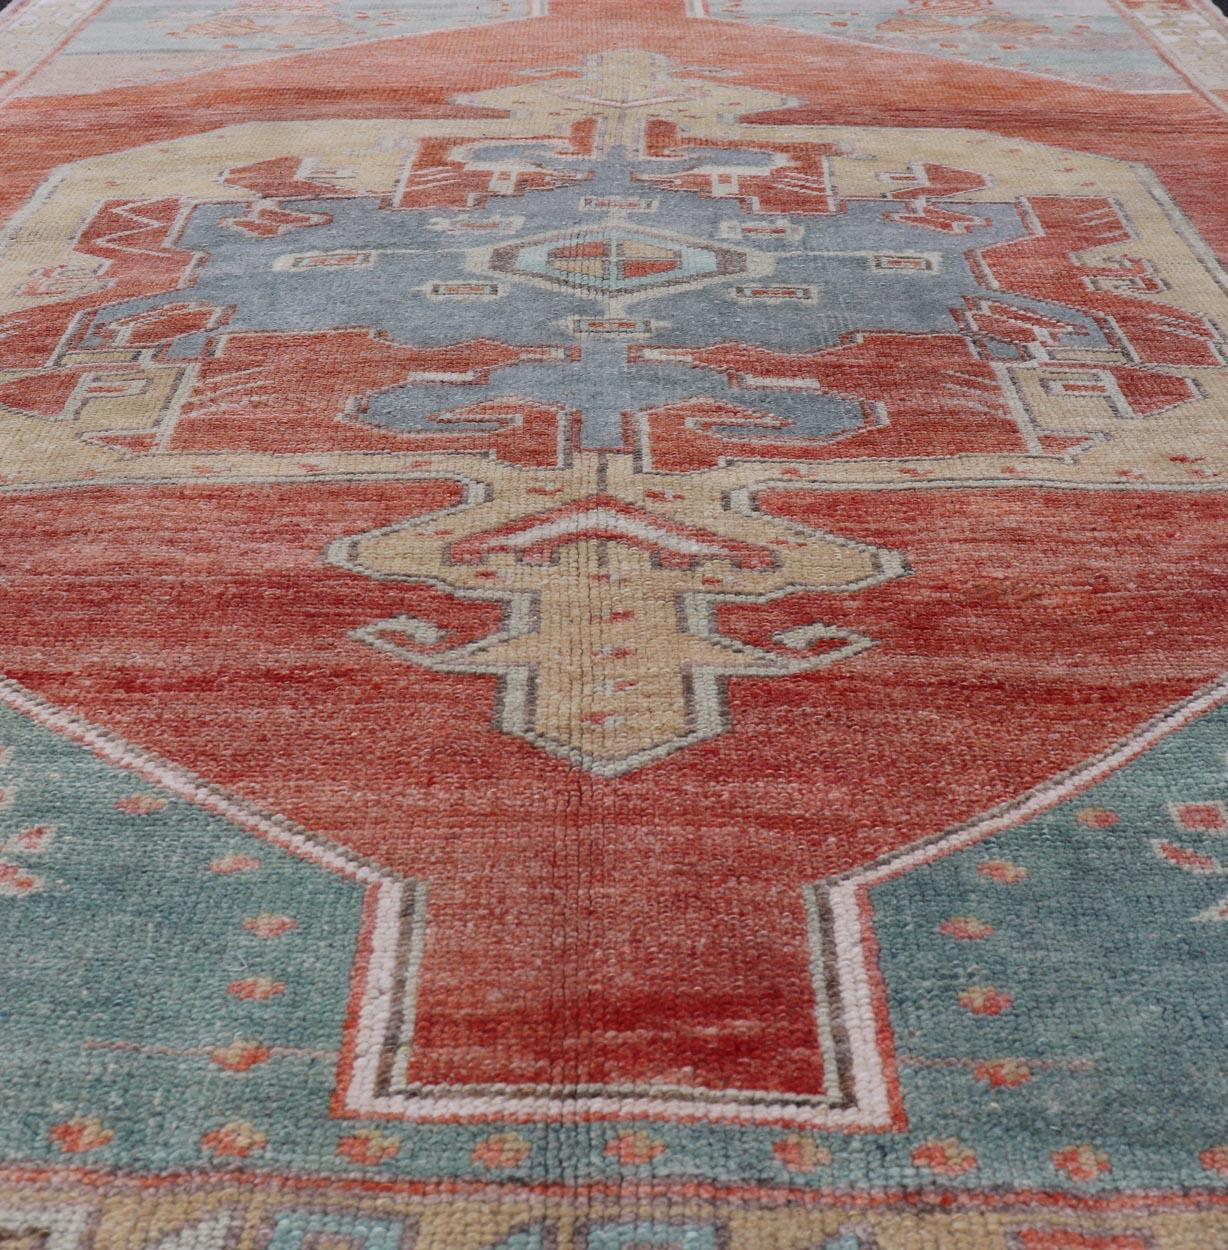 Vintage Turkish Oushak Rug with Large Medallion Design in Soft Red, Blue, Yellow For Sale 7